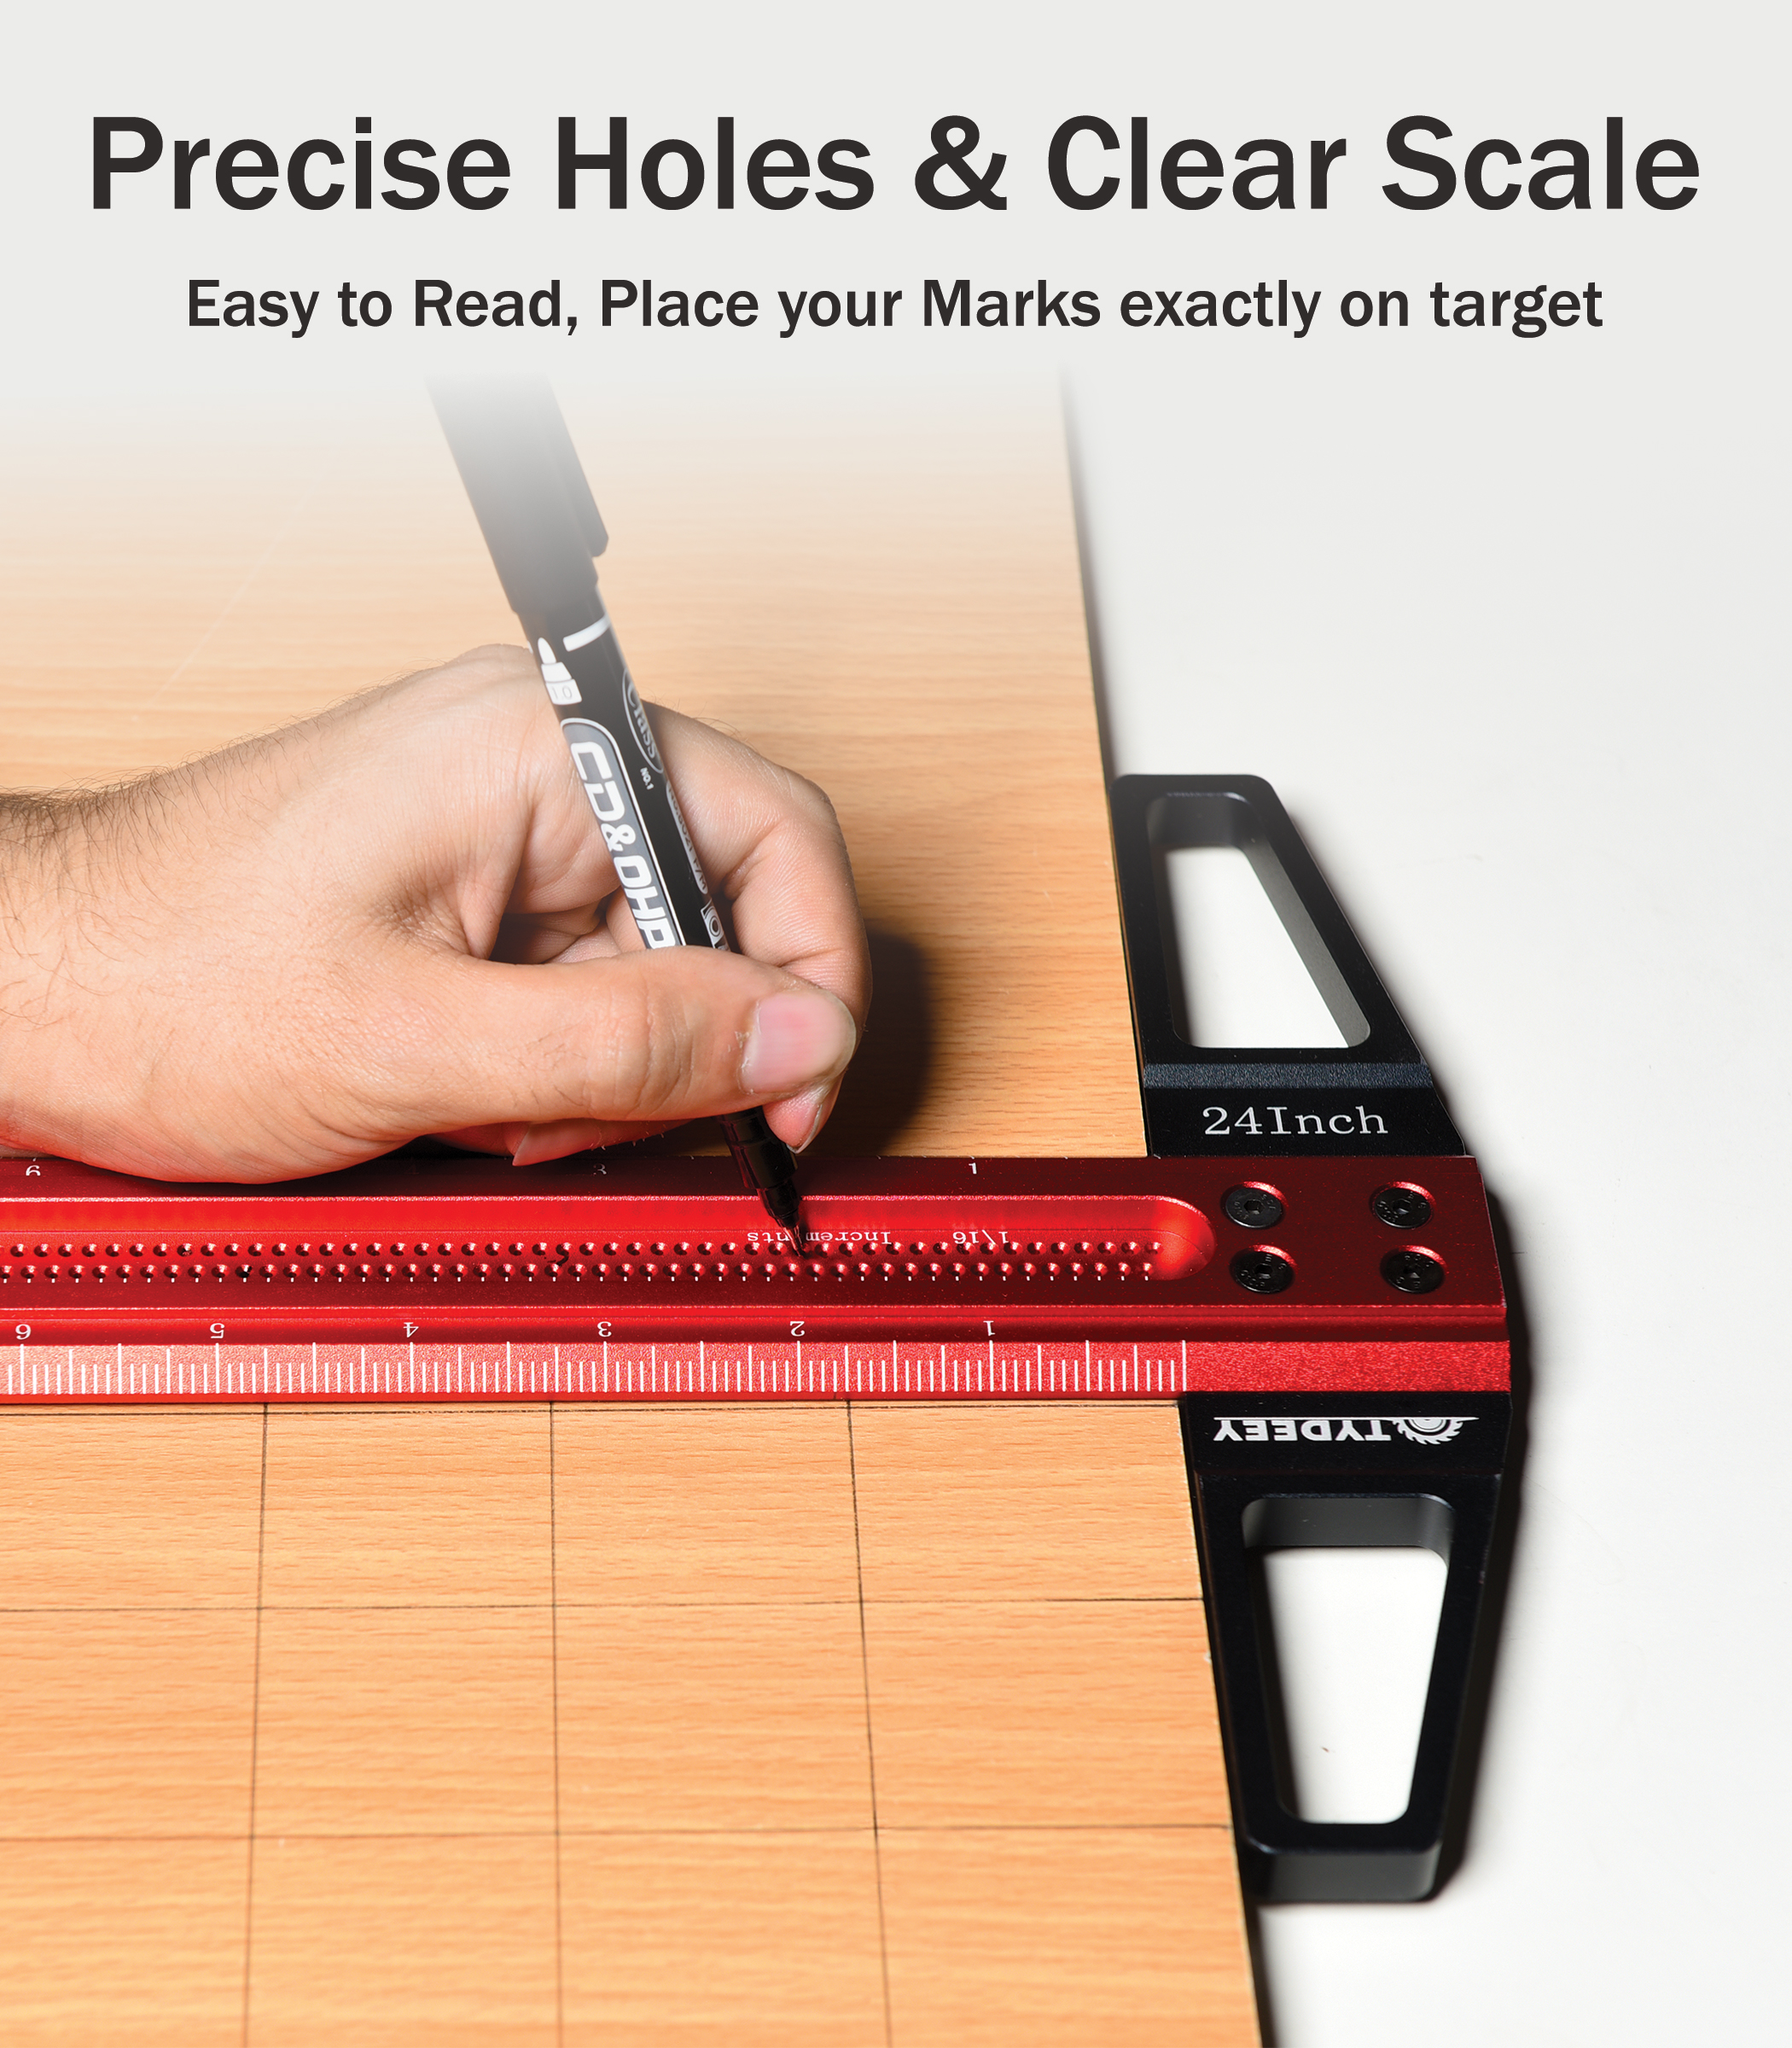 Shop T Square Ruler 24 Inch Detachable with great discounts and